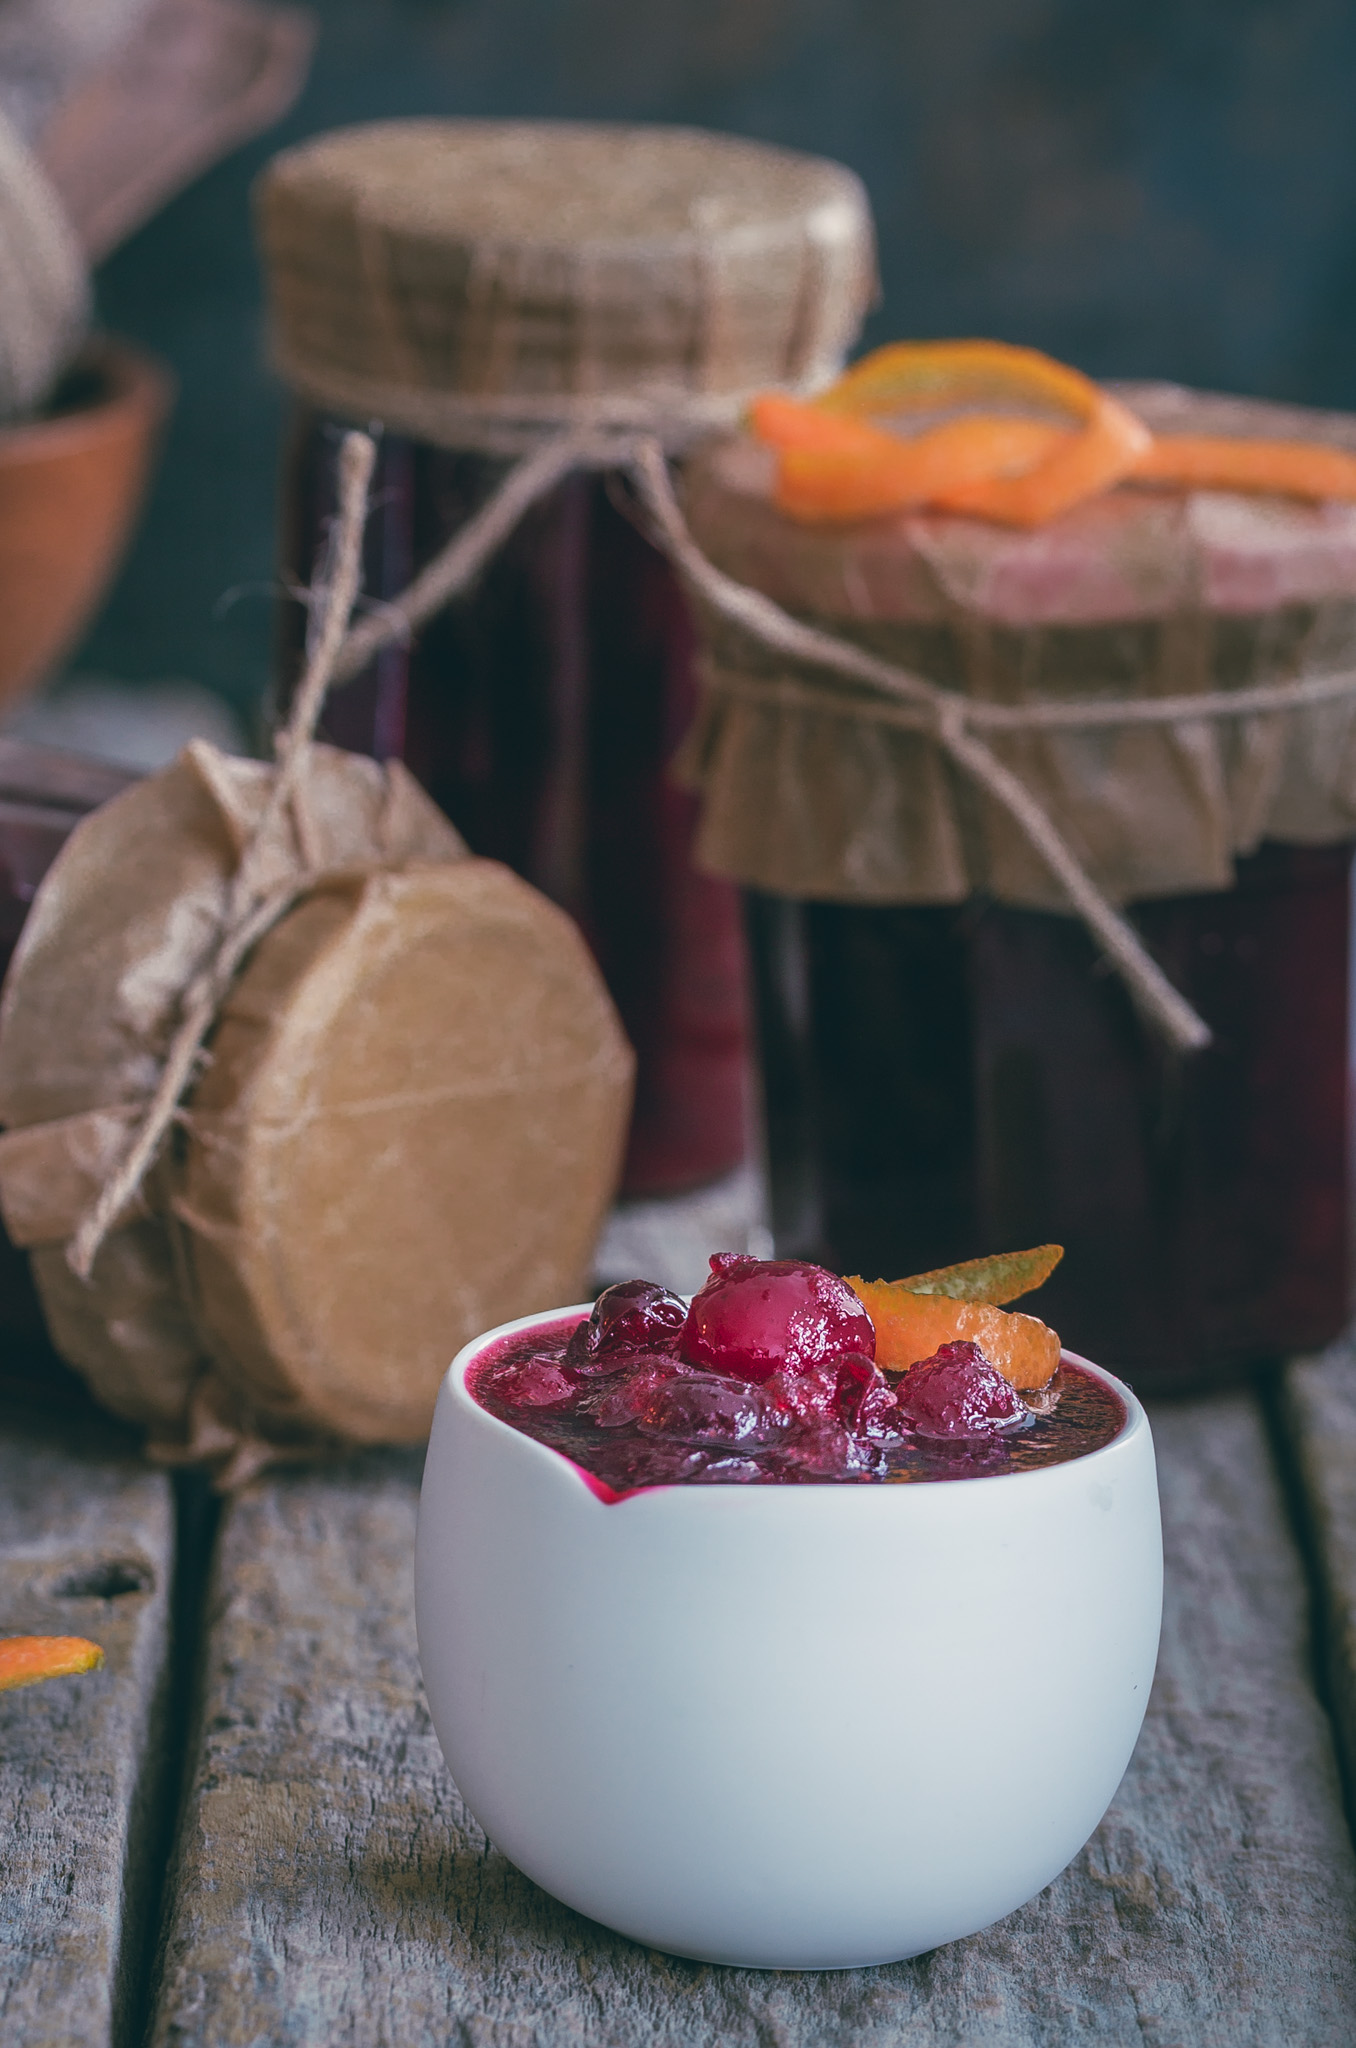 WEEKENDS IN THE KITCHEN: Cranberry Compote/ Сладко от чевени боровинки